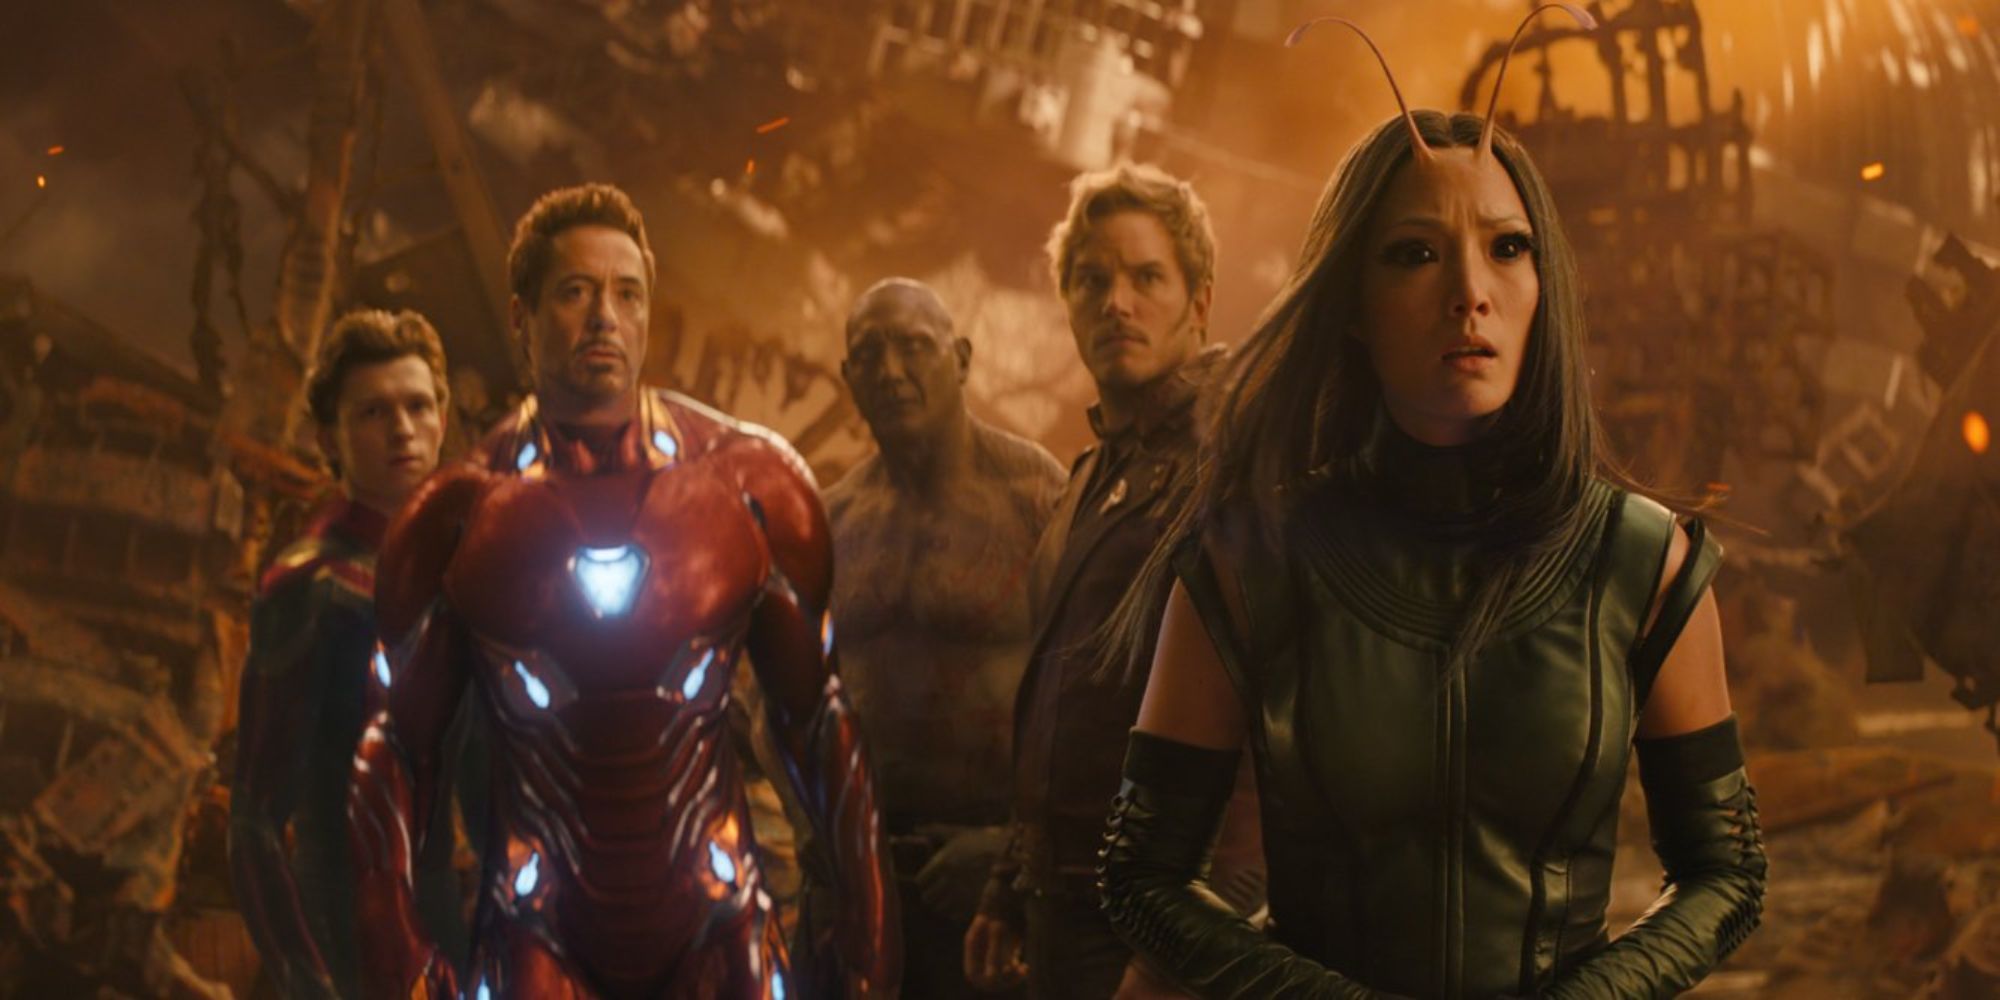 Spider-Man, Iron Man, Drax, Star-Lord, and Mantis stand together